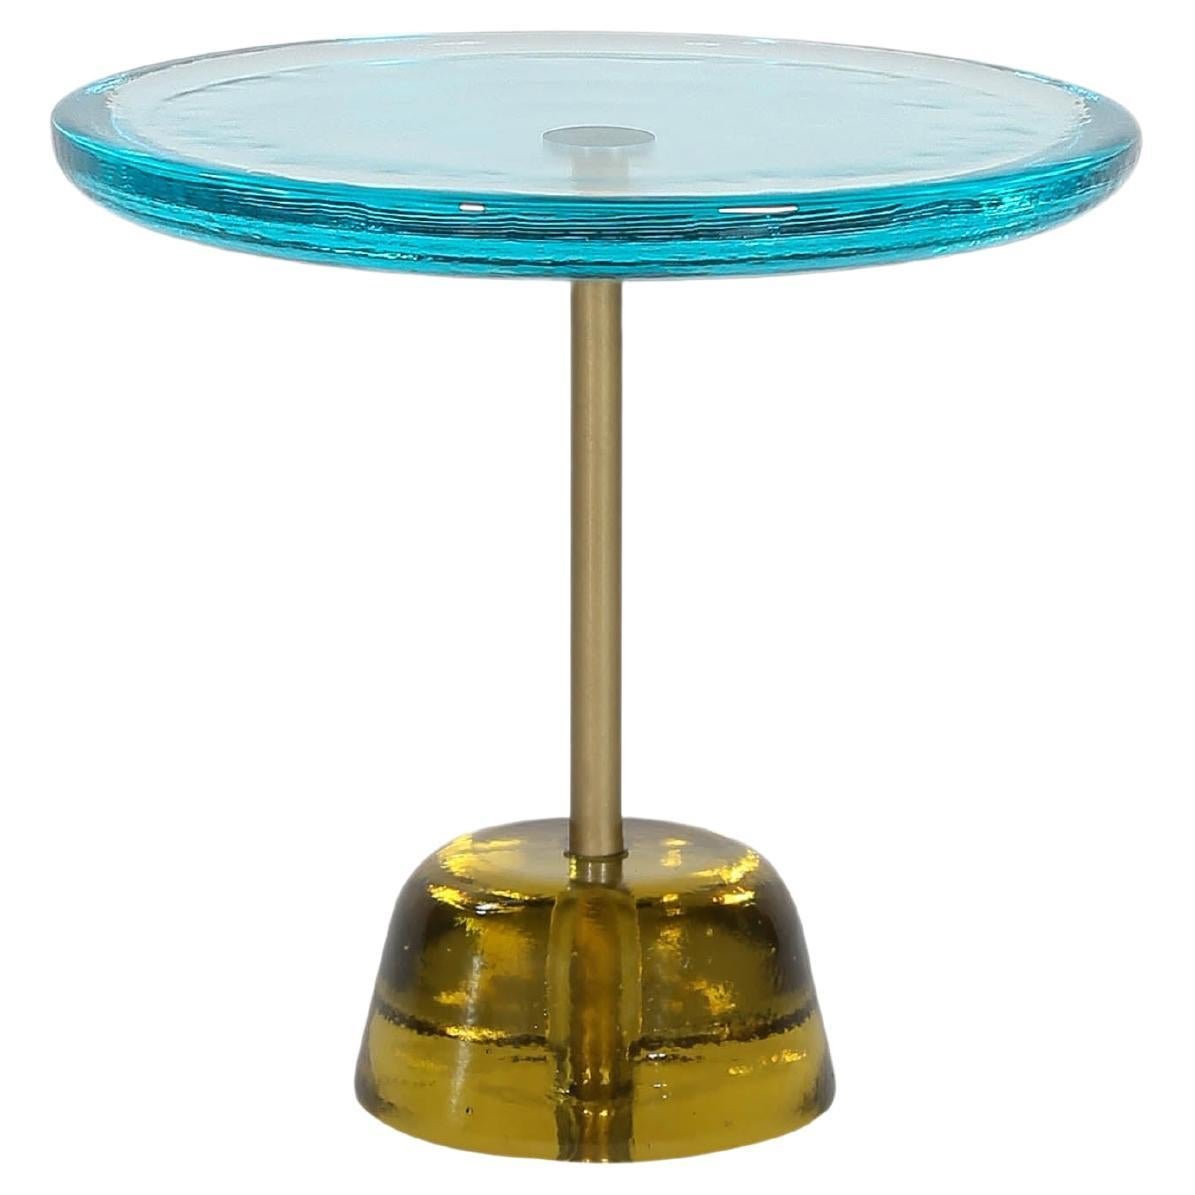 Pina Low Aqua Blue Brass Side Table by Pulpo